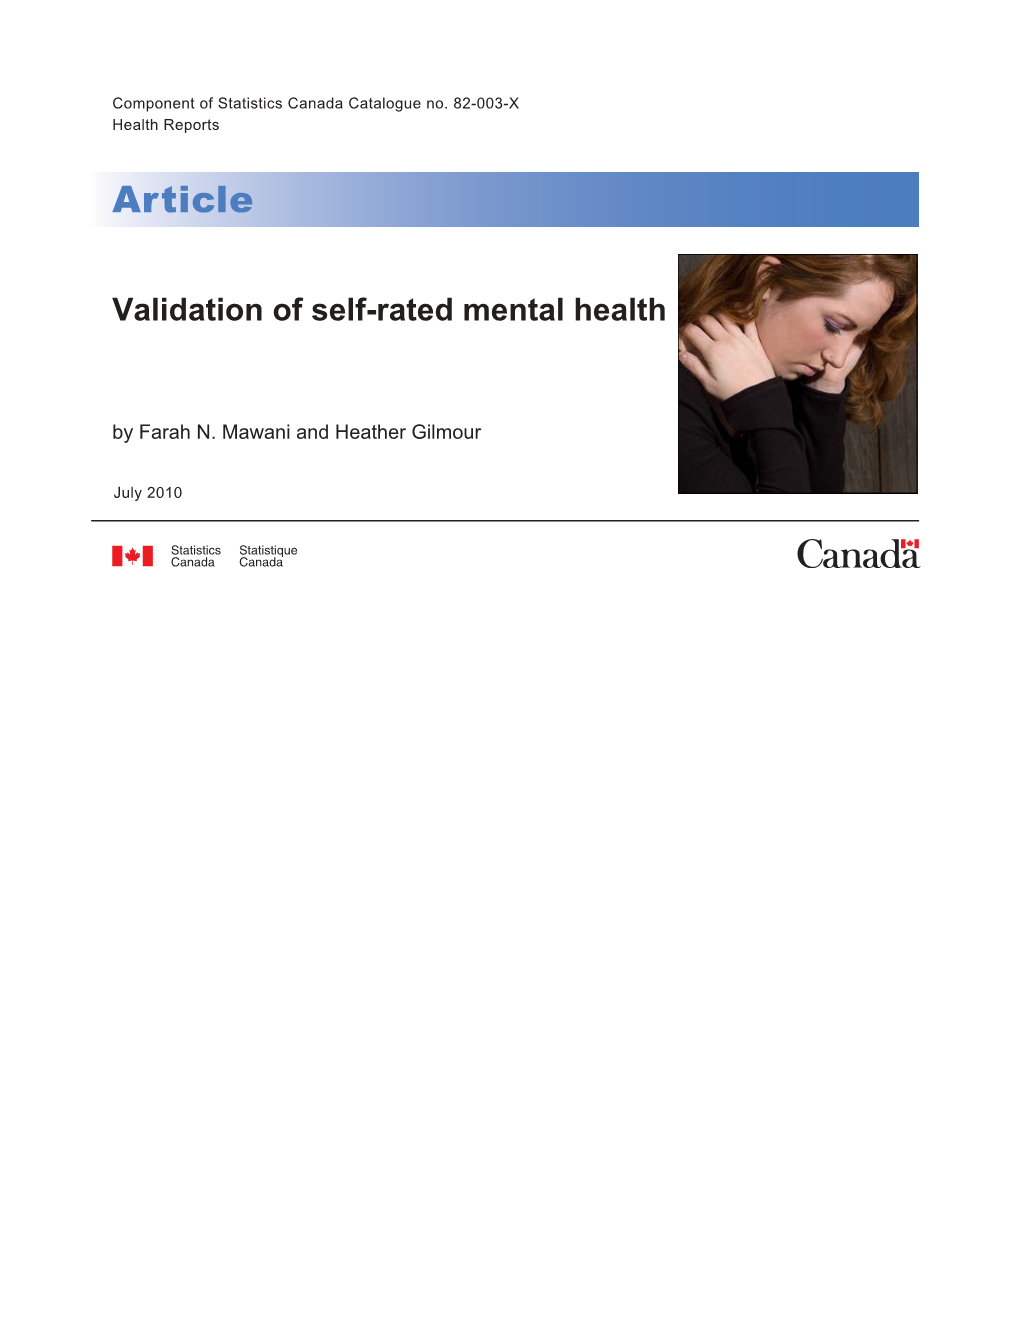 Validation of Self-Rated Mental Health